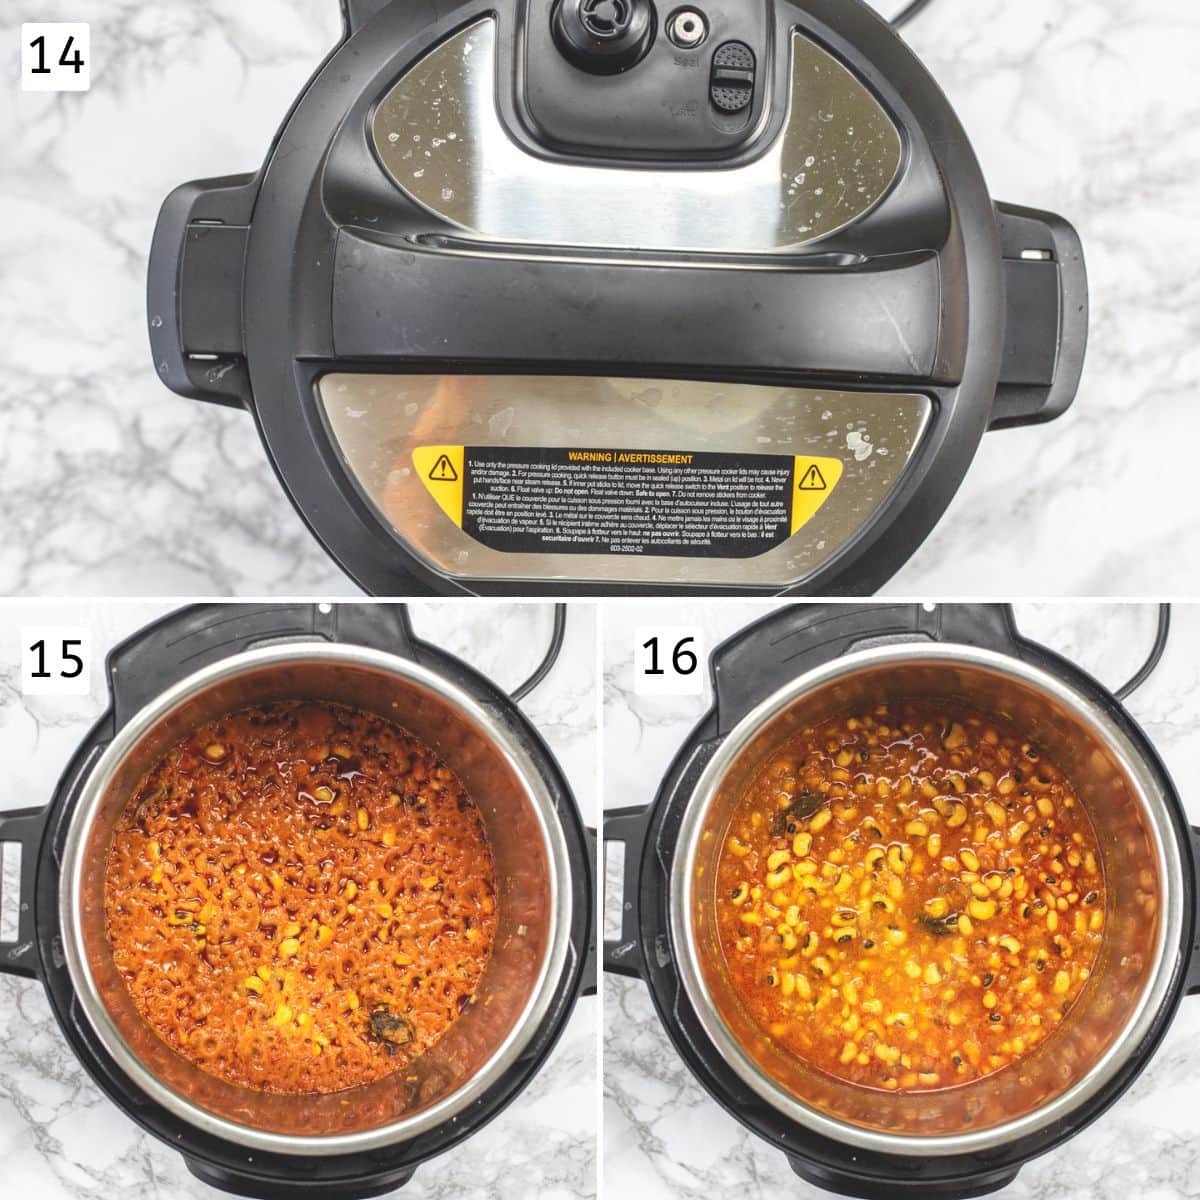 Collage of 3 images showing instant pot with lid, cooked black eyed peas curry.